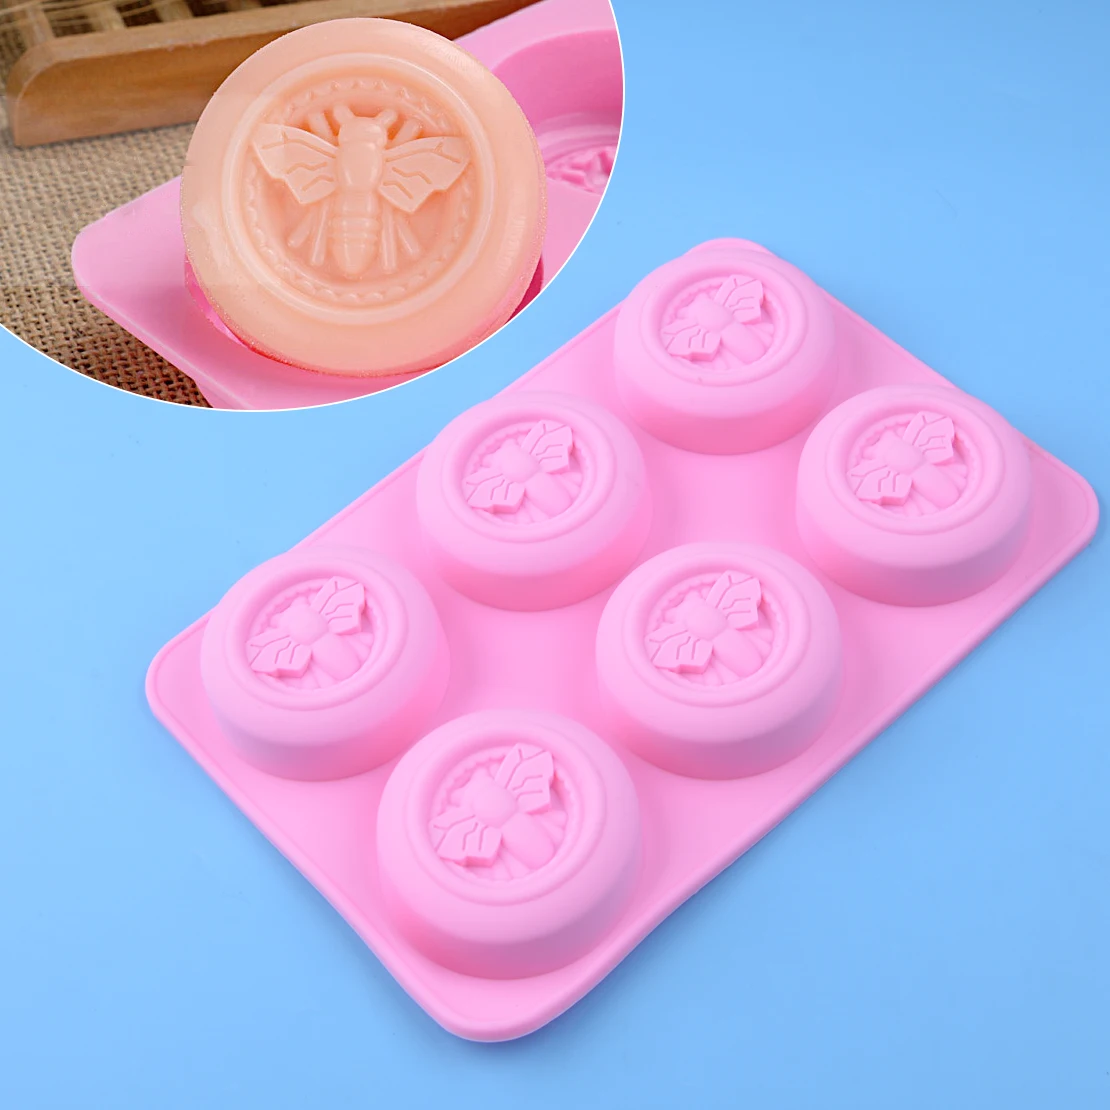 

6 Cavity Pink Round Silicone Honey Bee Wax Soap Mould Mold Tray Handmade DIY Making Crafts